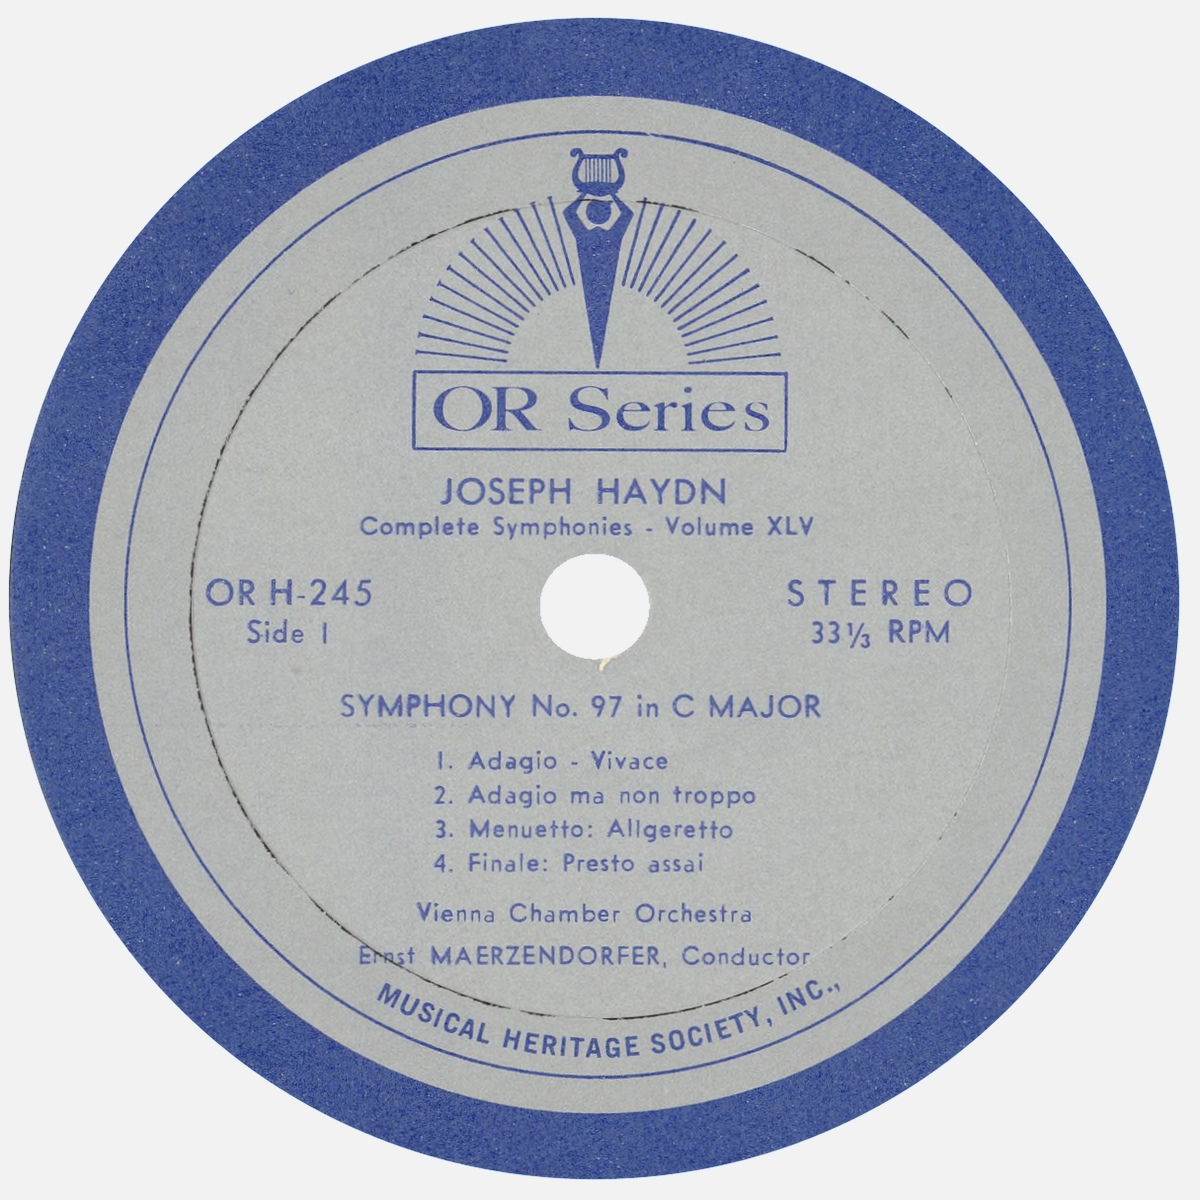 Étiquette recto du disque «The Musical Heritage Society Inc.» MHS OR 245